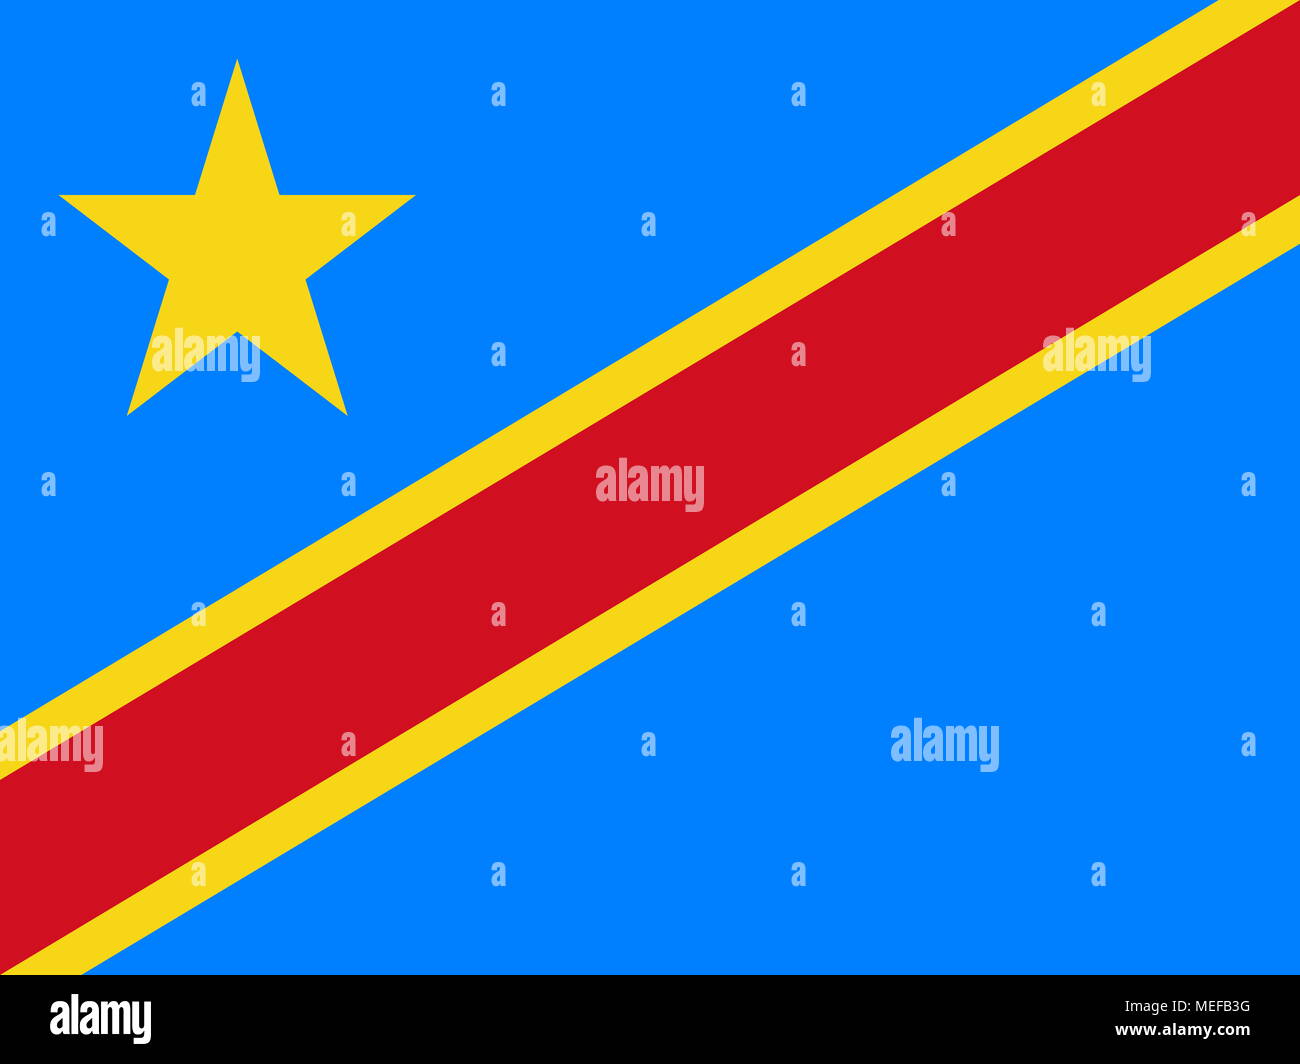 Official Large Flat Flag of the Democratic Republic of the Congo Horizontal Stock Photo